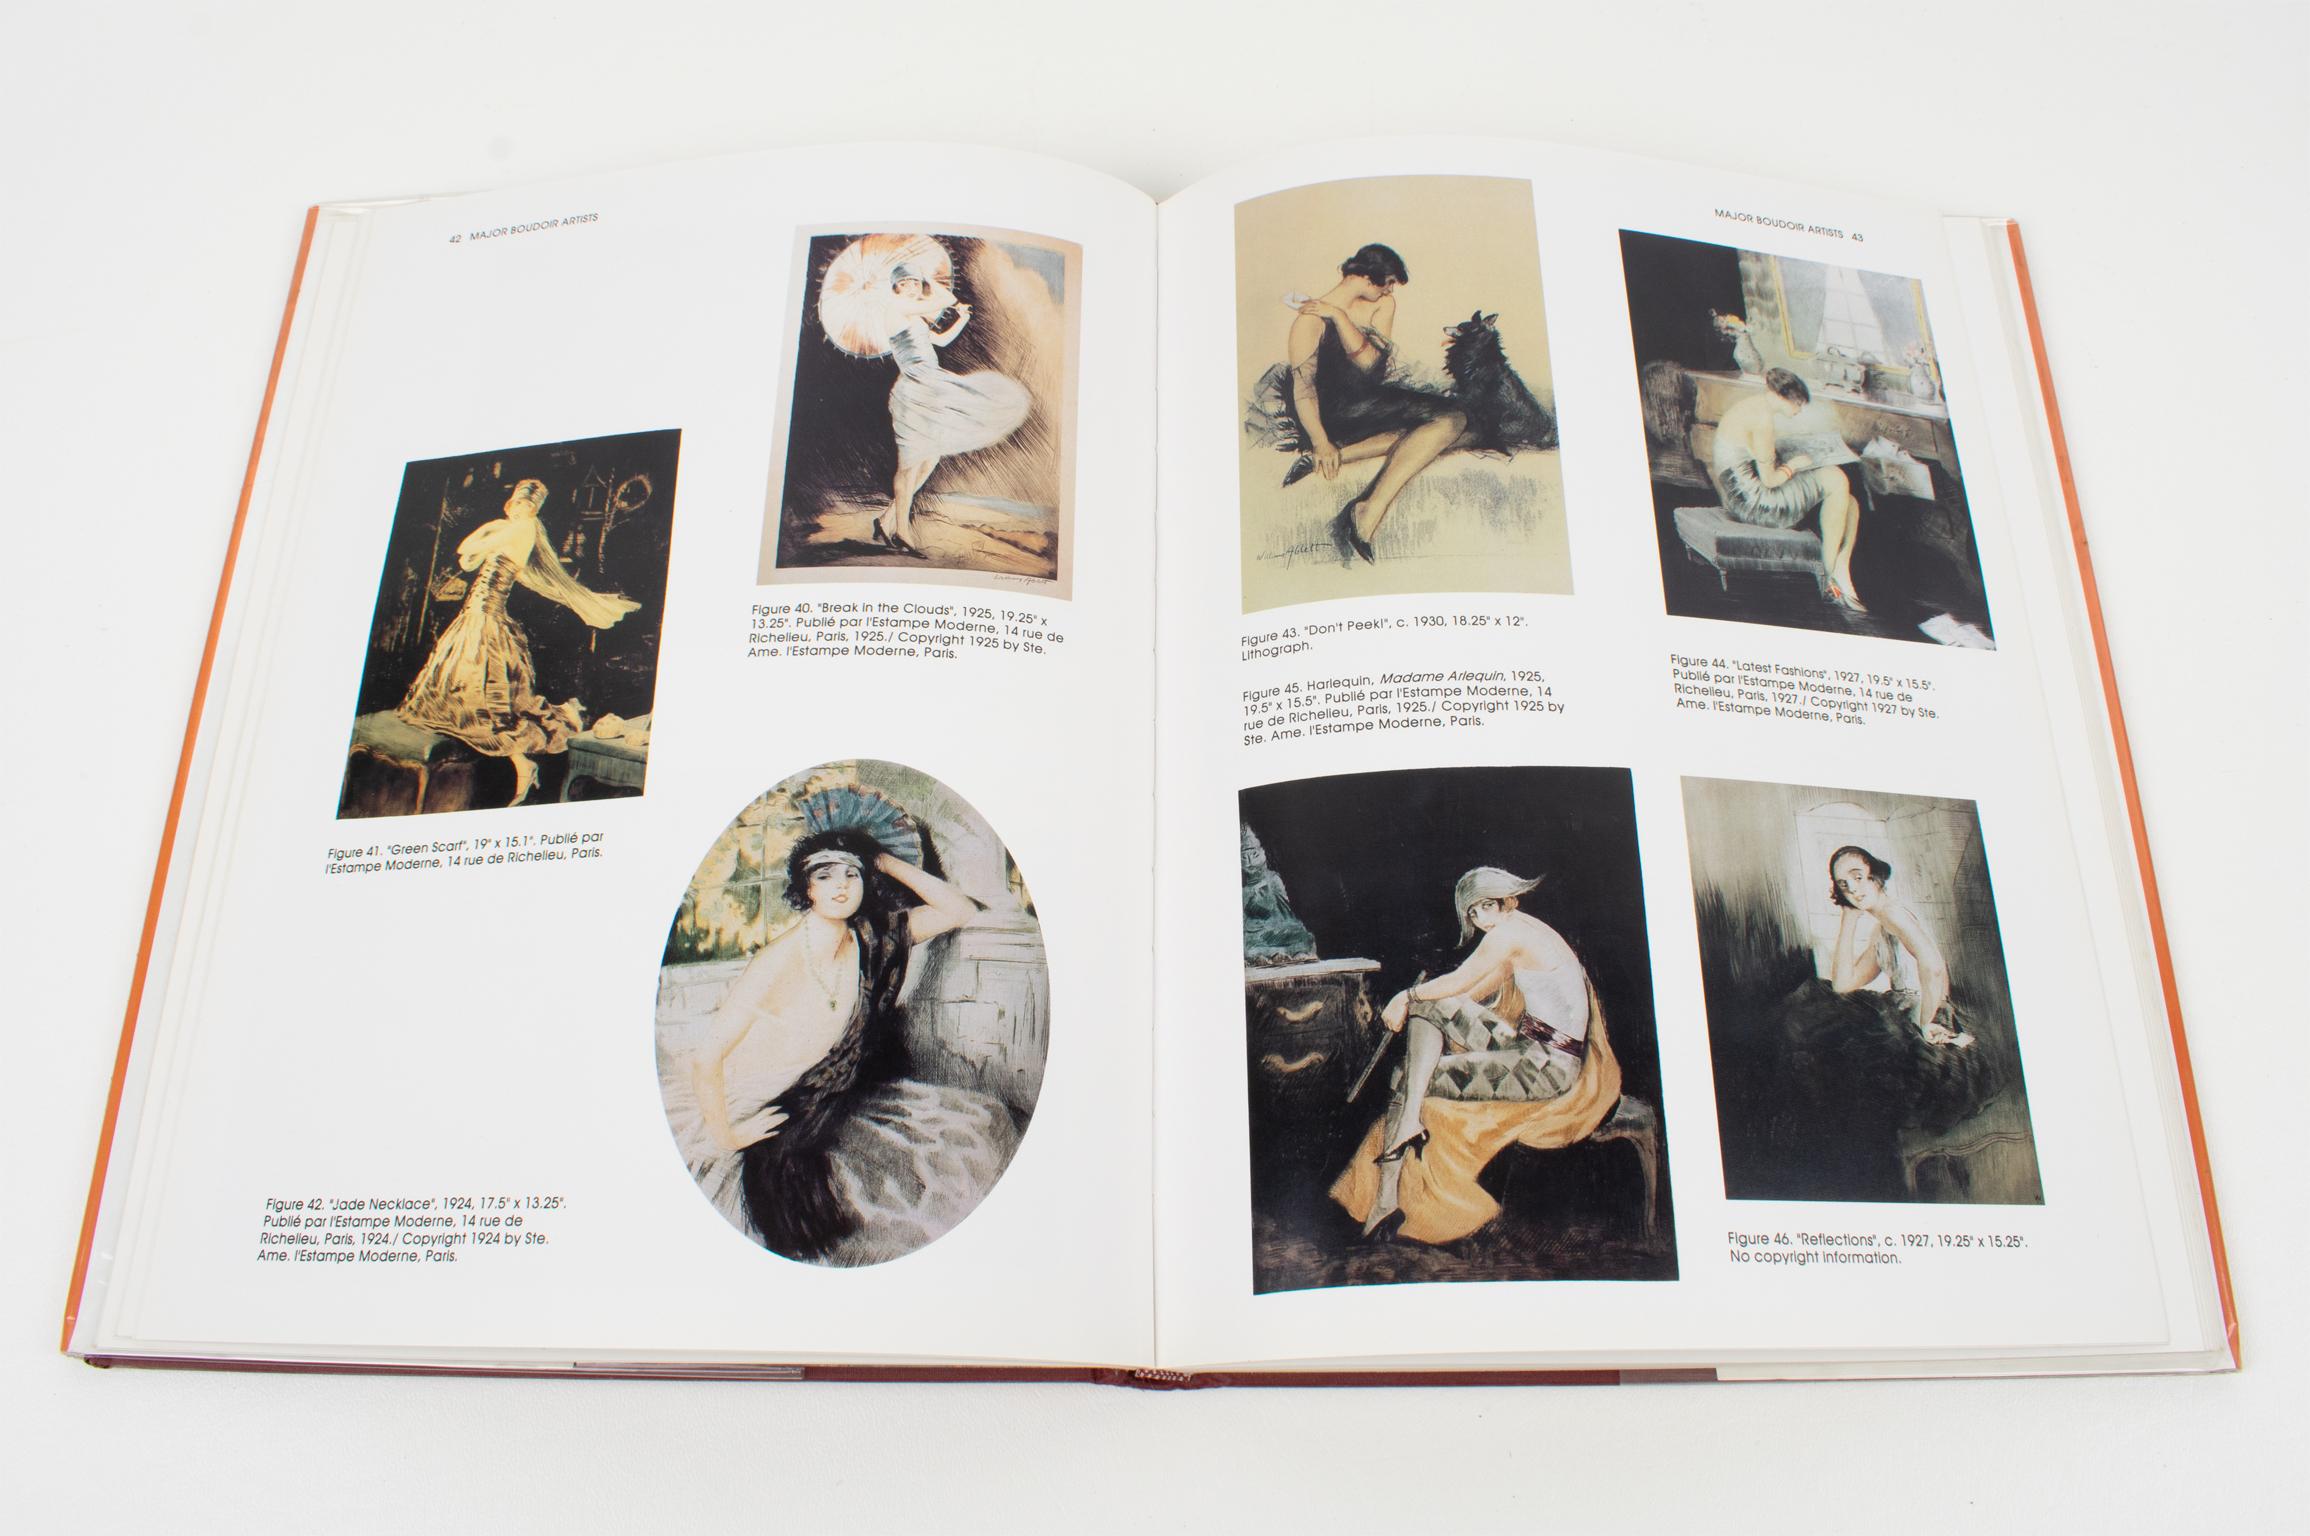 Paper Boudoir Art, The Celebration of Life Book by Clifford Catania, 1997